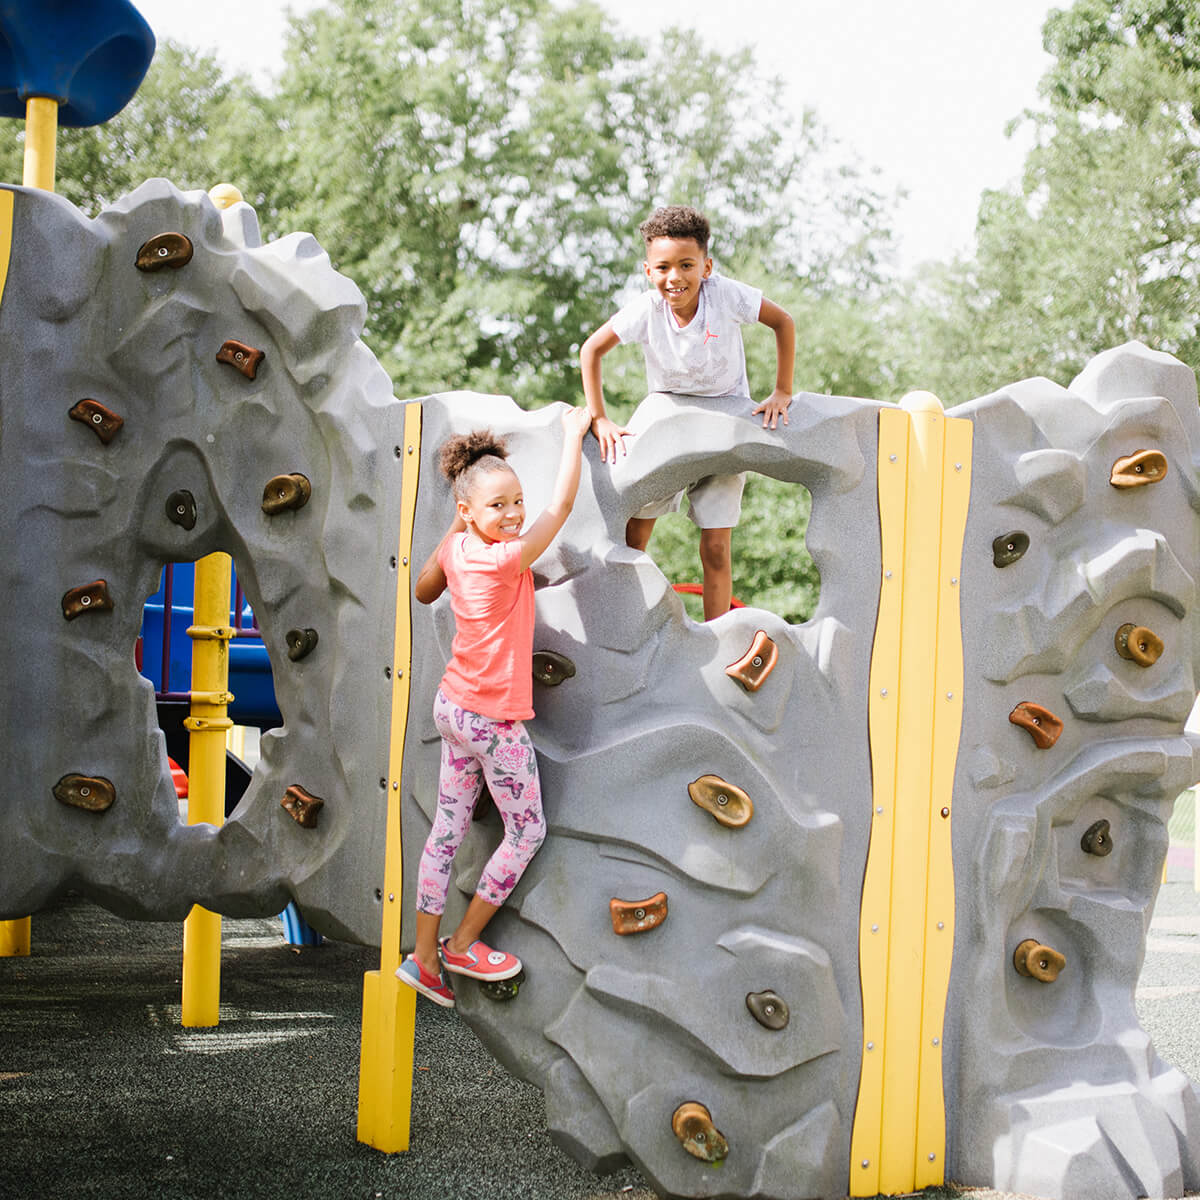 Two children climbing up and playing on a playground rock wall